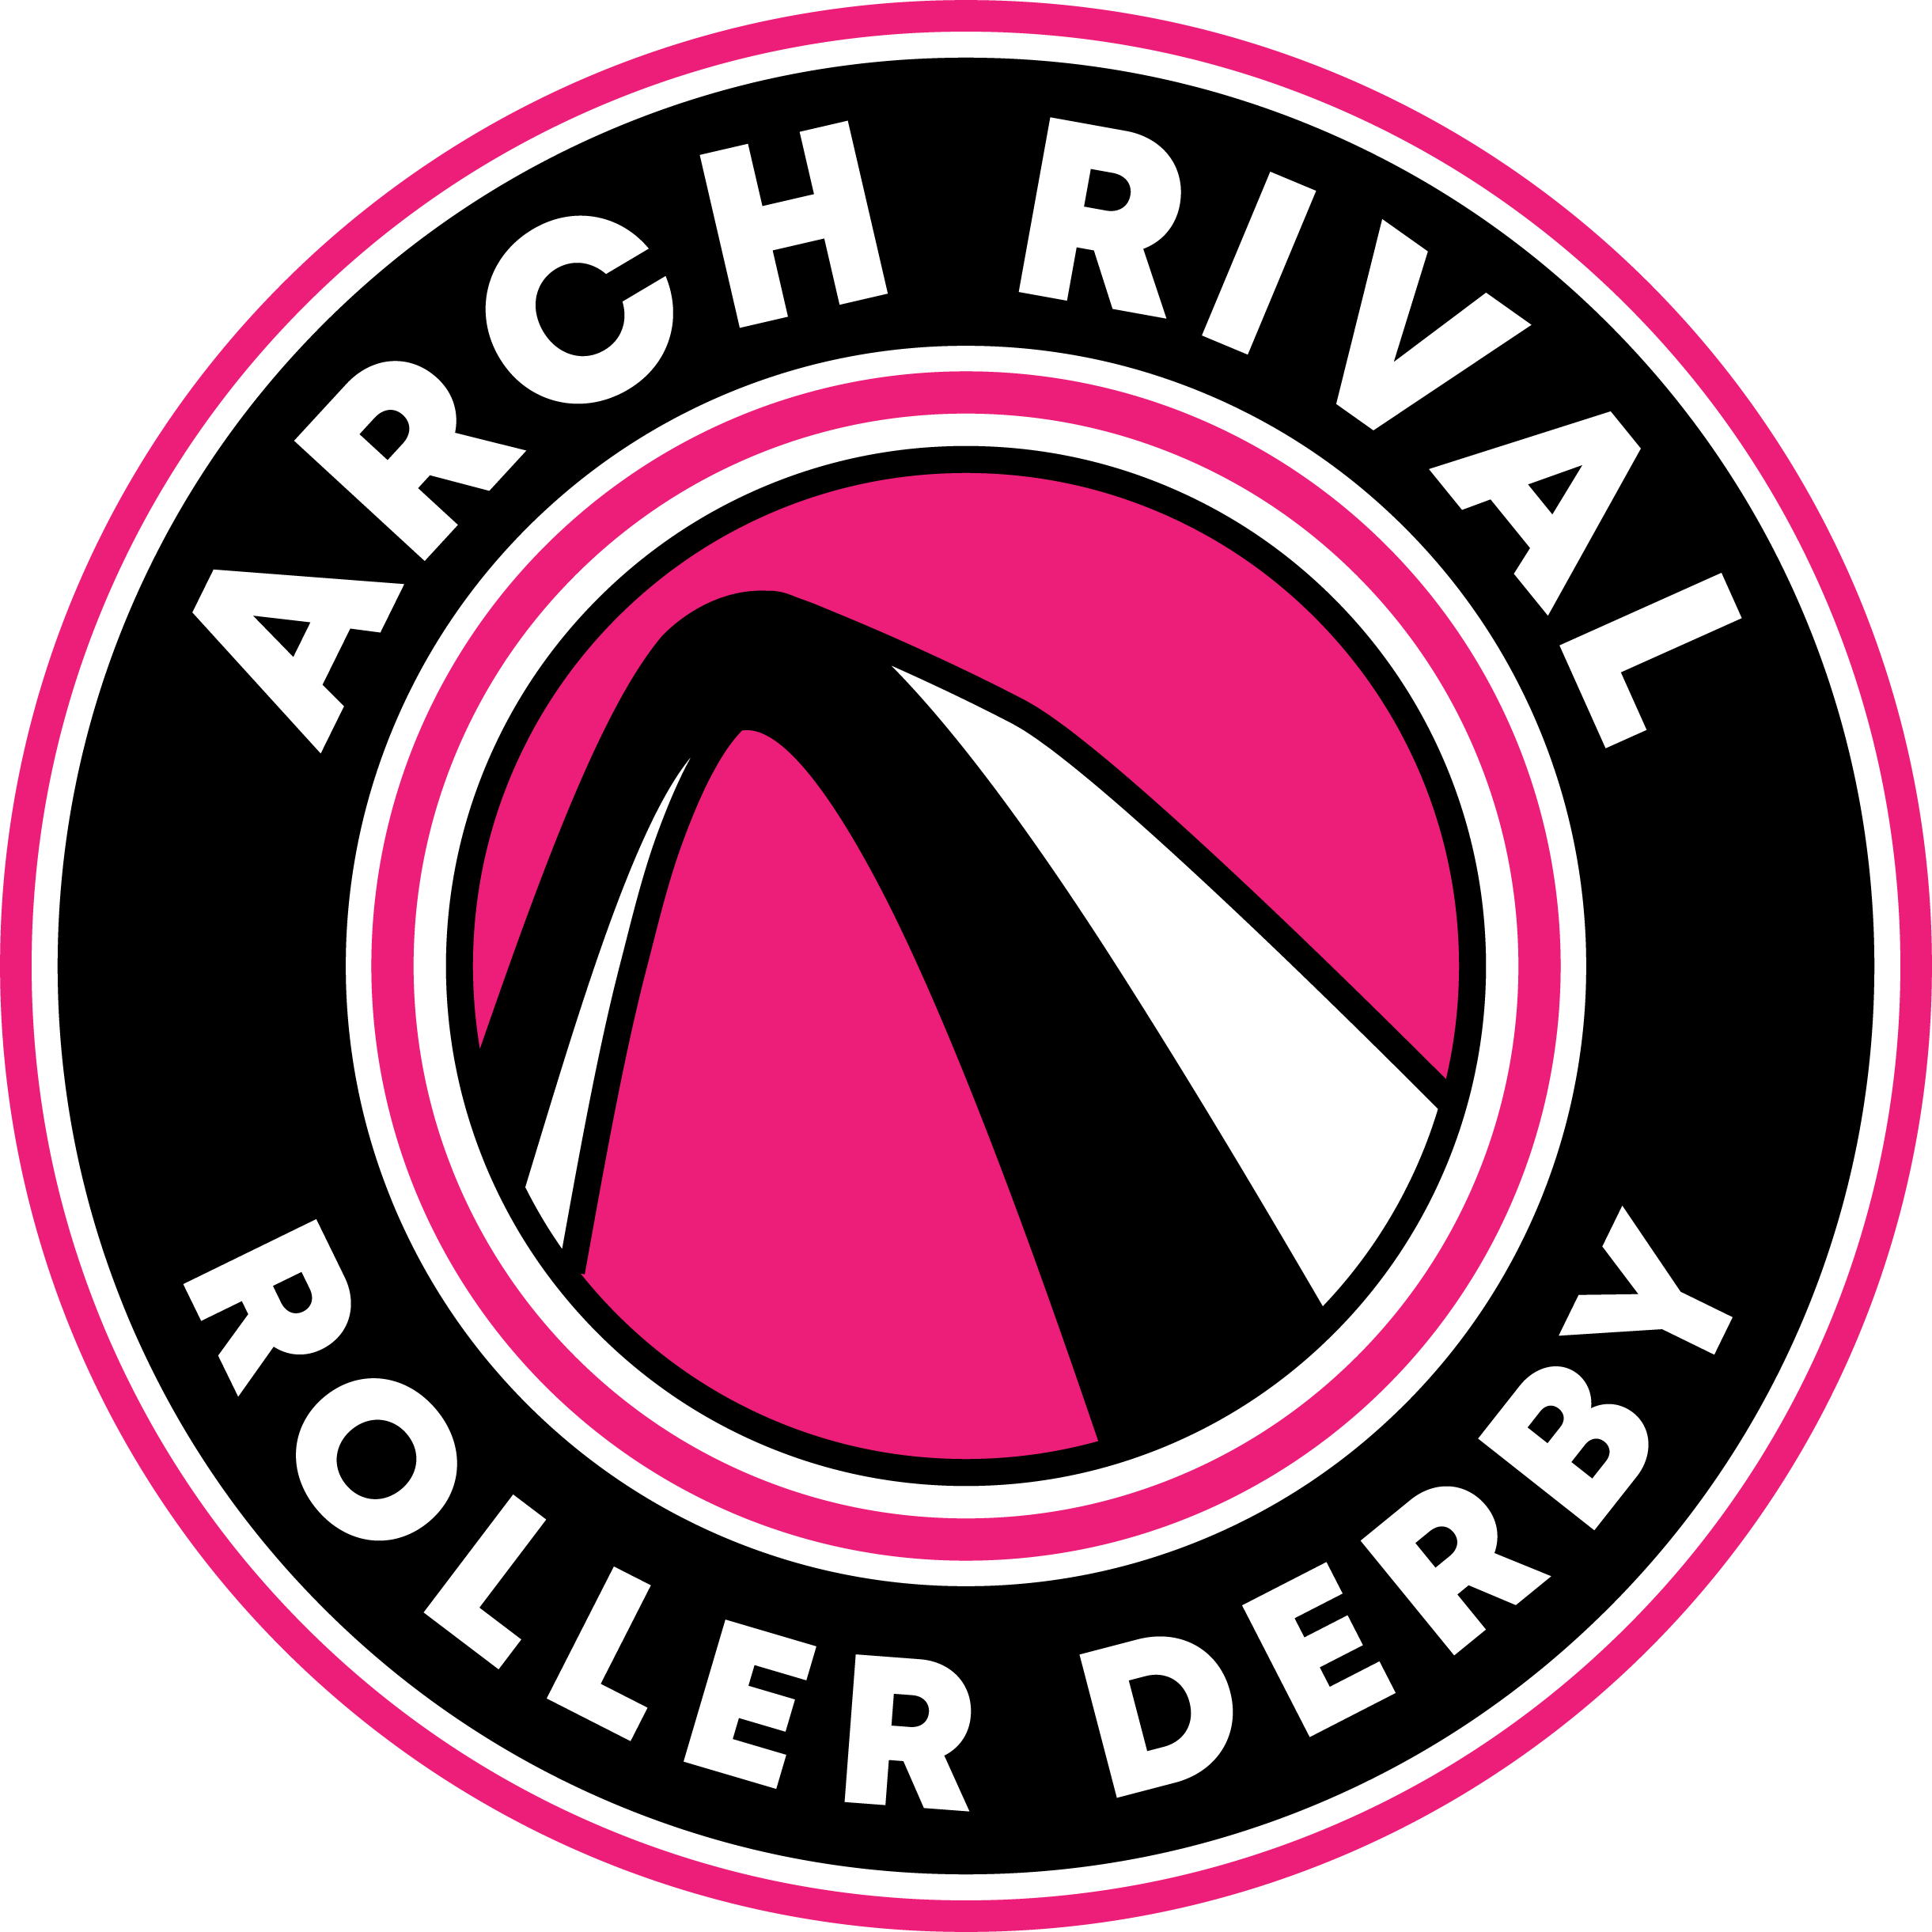 Arch Reveals New League Logo Rival The - Arch Rival Roller Derby (2442x2442)